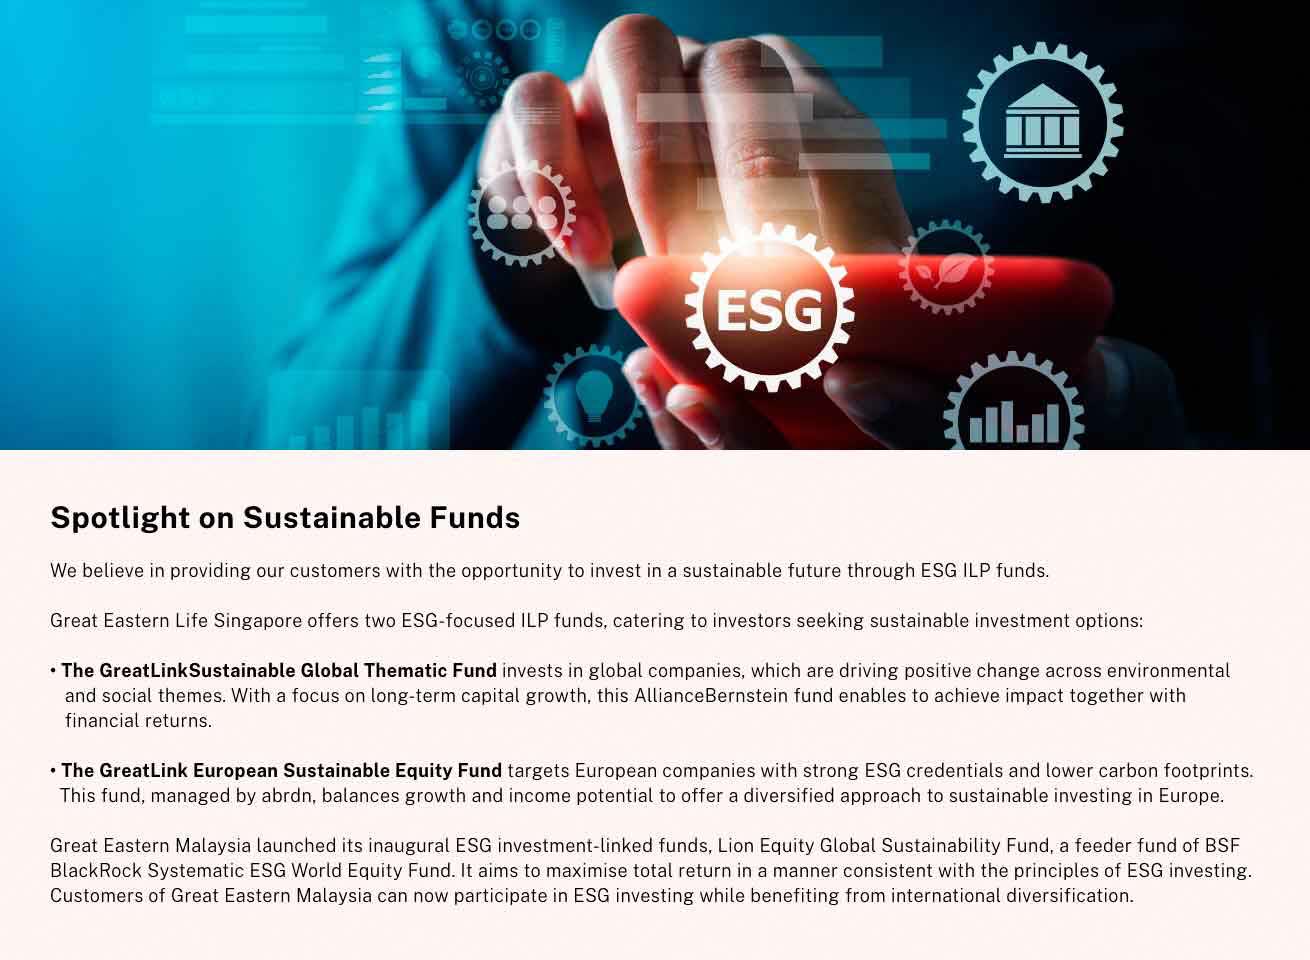 Sustainable funds